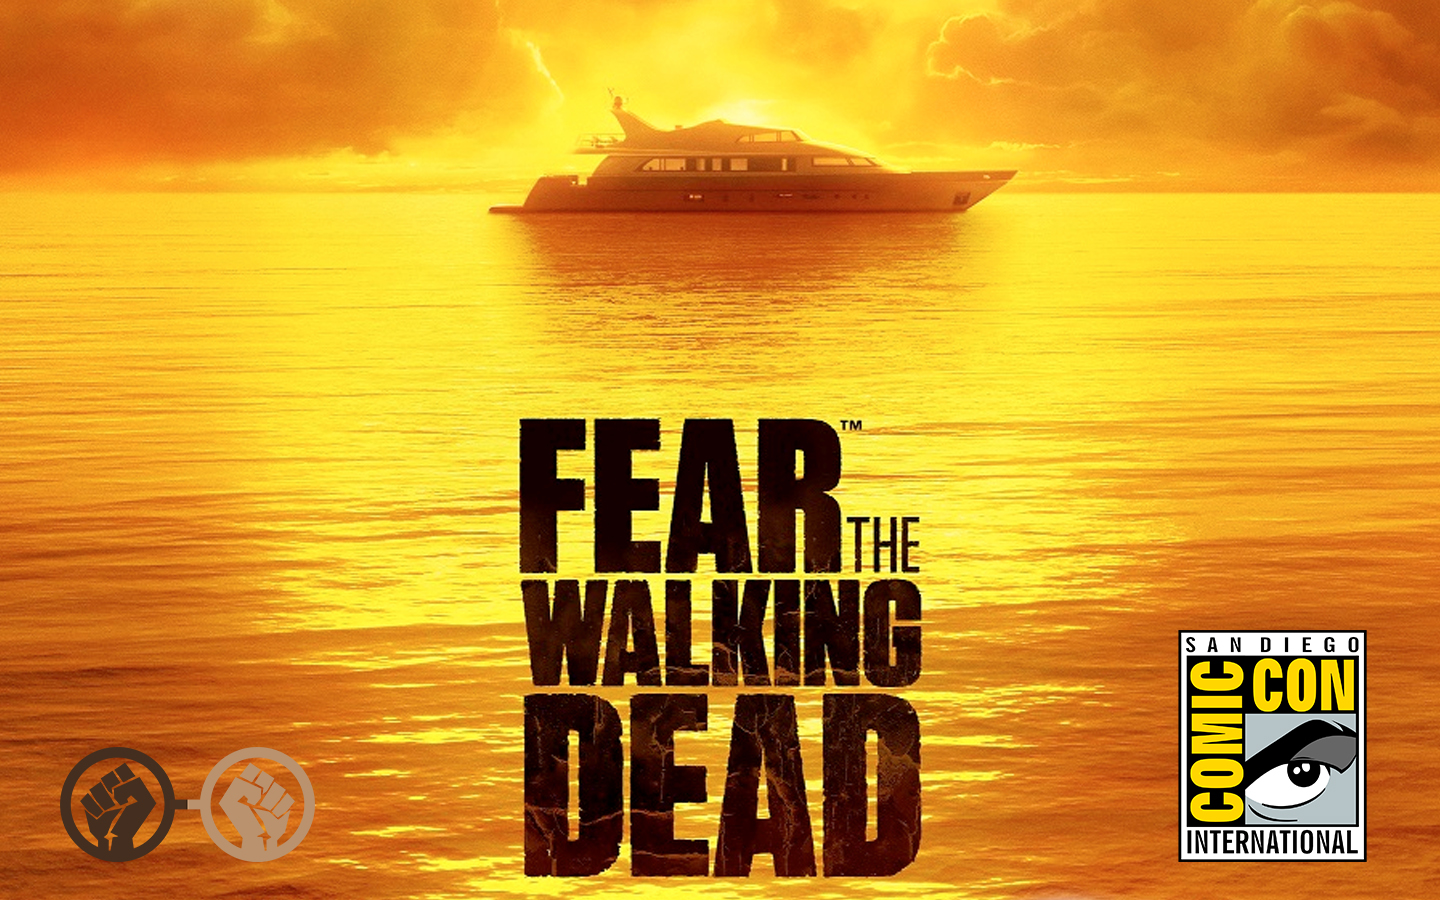 ‘Fear The Walking Dead’ Gets New Trailer and Premiere Date #SDCC2017